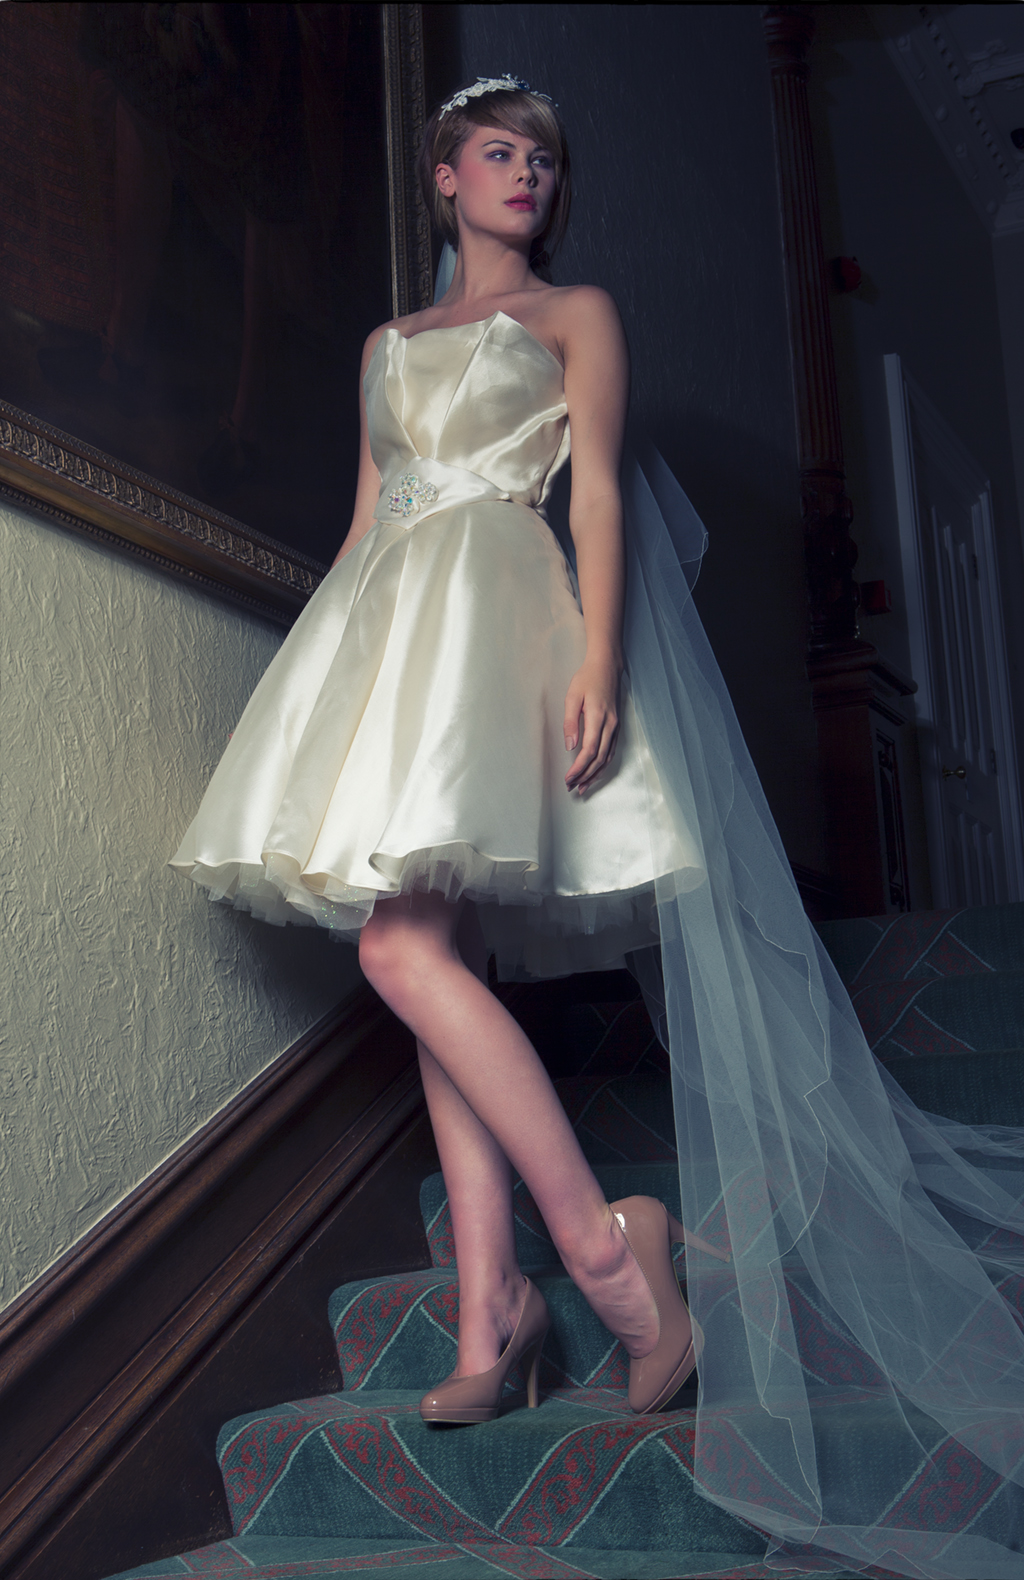 long train converts this to an iconic wedding dress showing off the slim figure and long legs